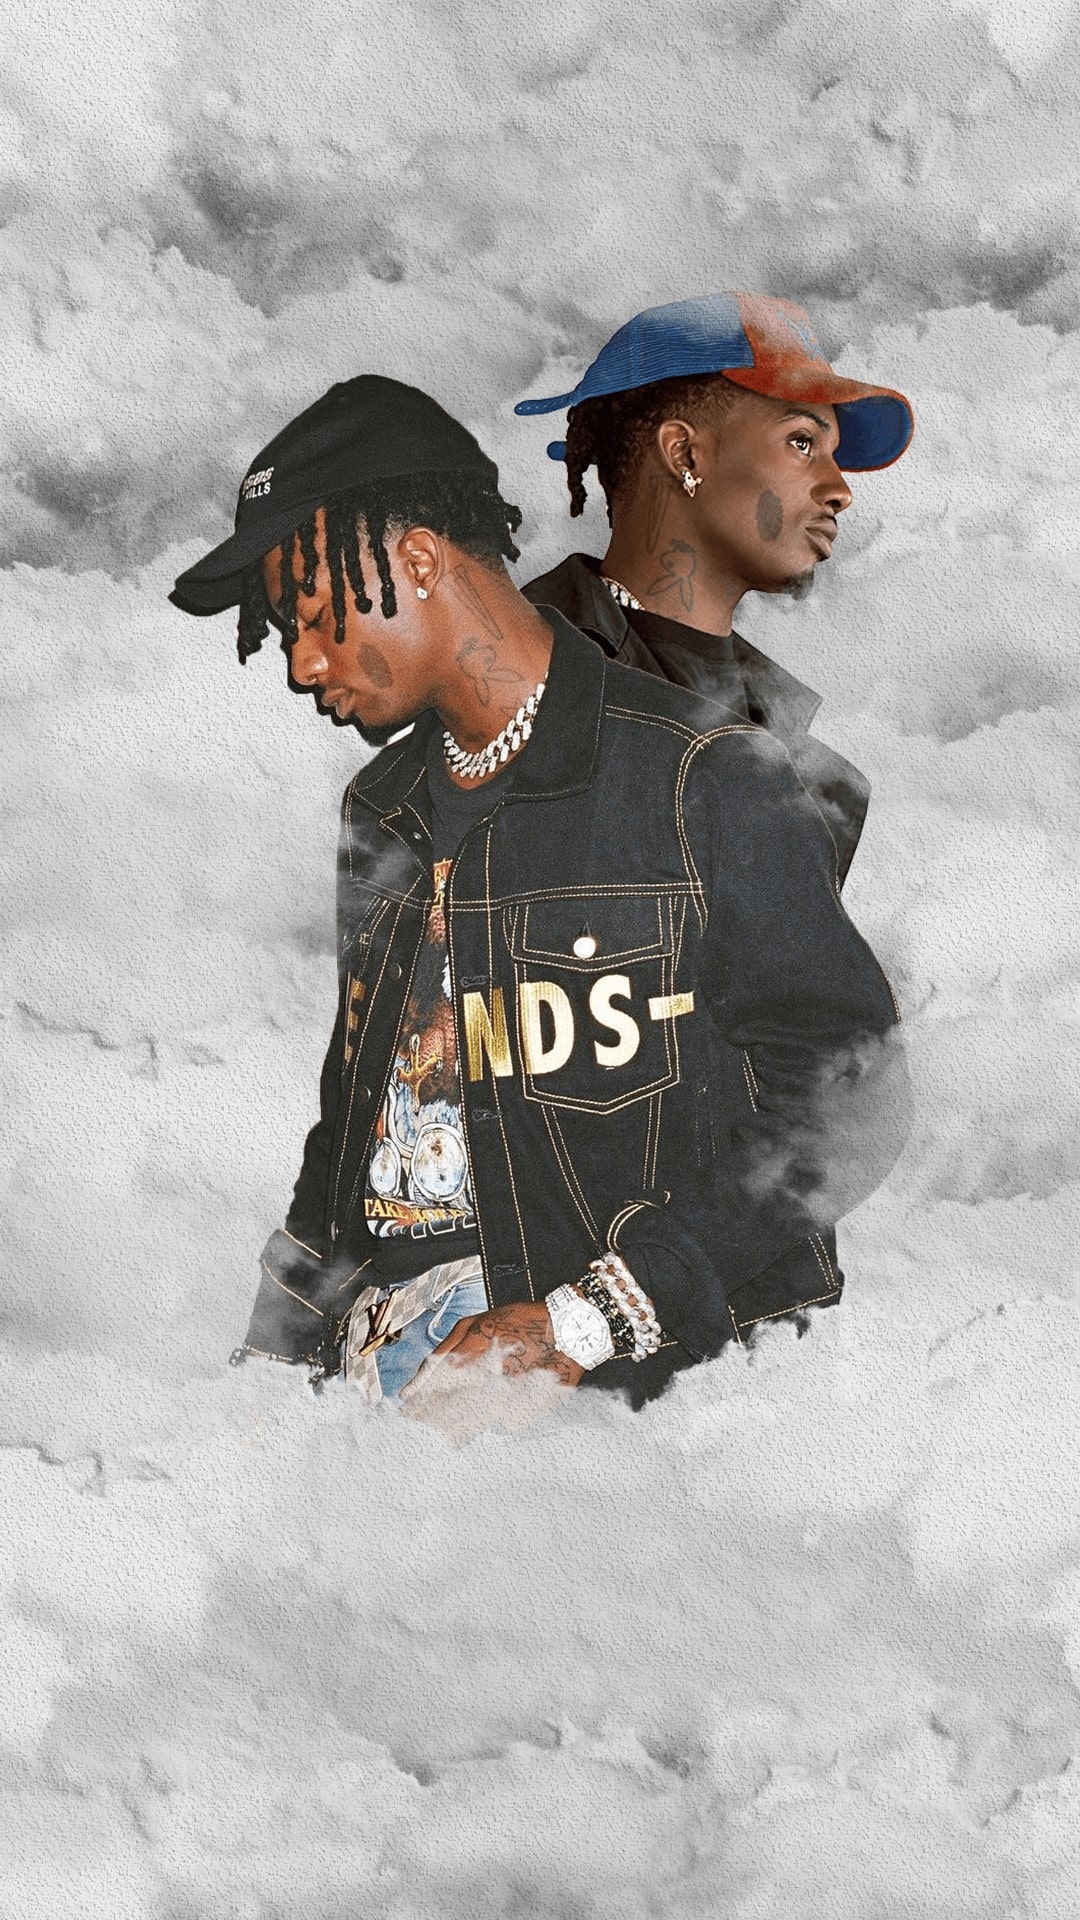 Awge Wallpapers